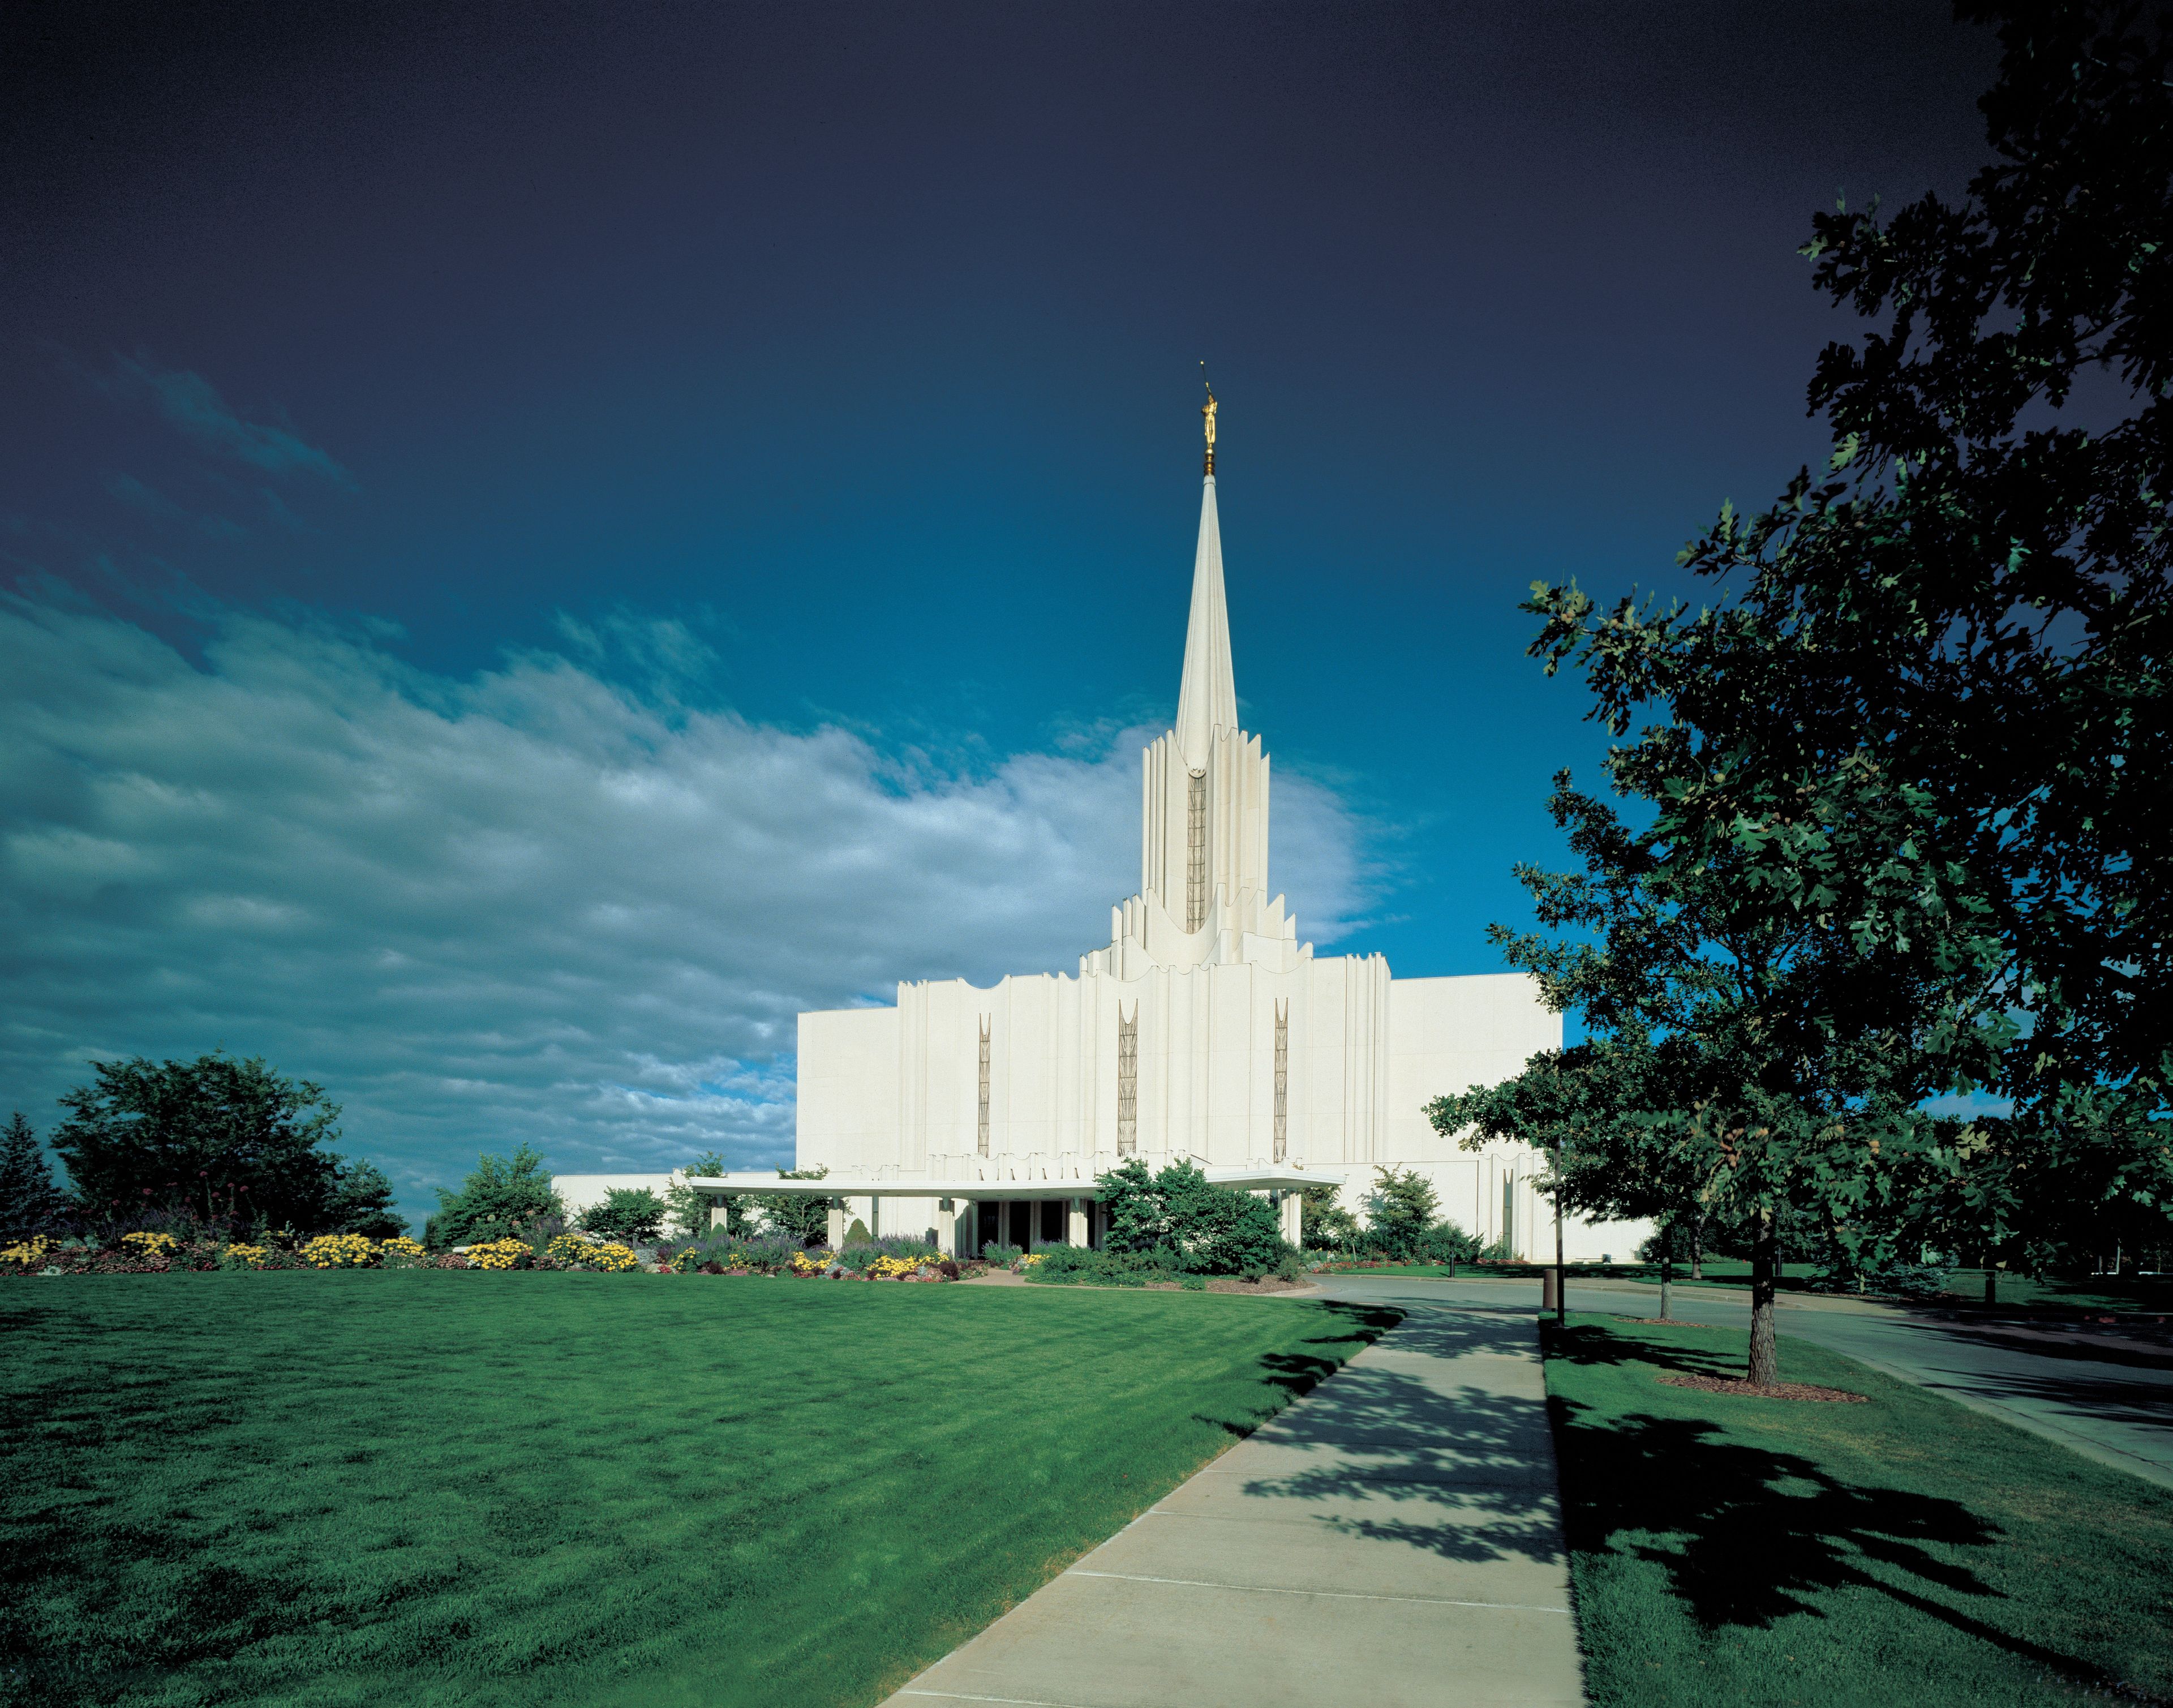 The Jordan River Utah Temple and grounds on a bright day.